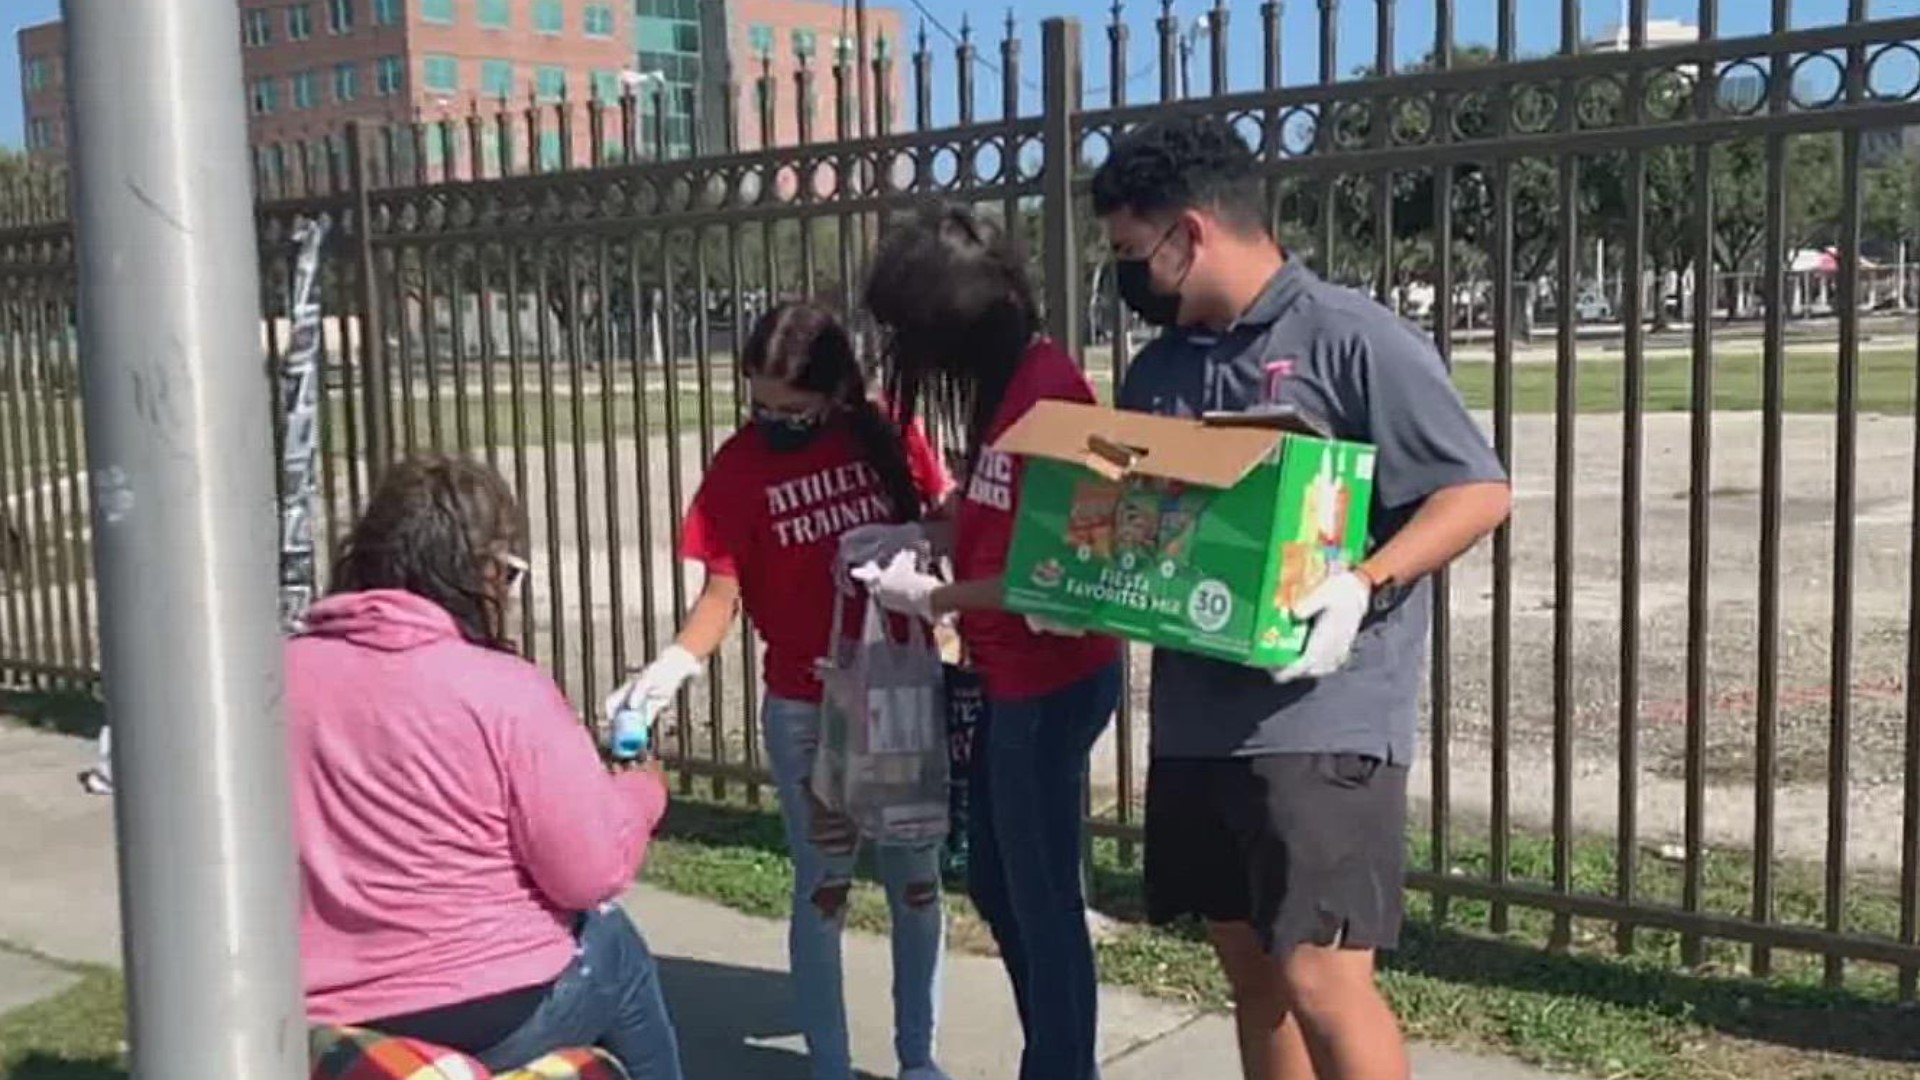 Dayana Carrasco, a junior at Ray High School, got some of her classmates together to collect some food and supply packs for the homeless population in the area.